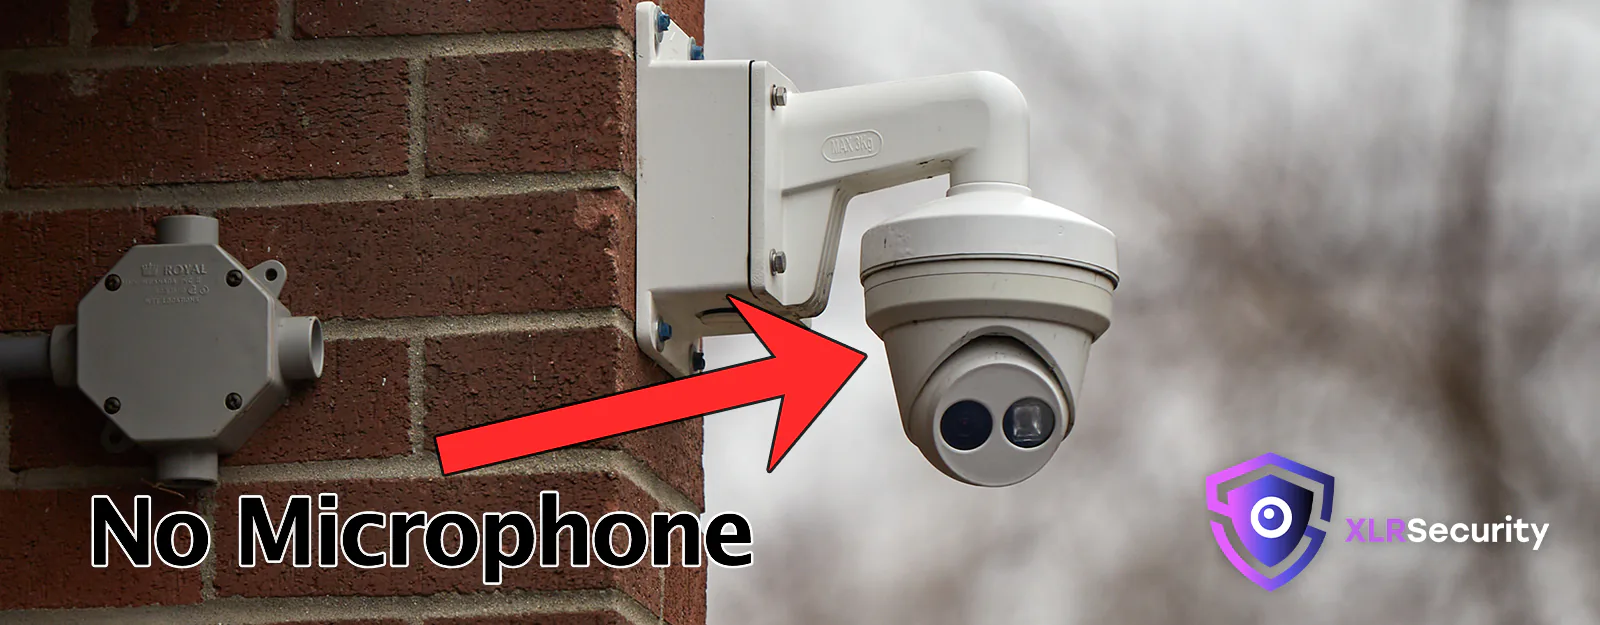 A security camera mounted on a brick wall with a red arrow pointing towards it that says No Microphone. There's also a logo at the bottom right that says XLR Security